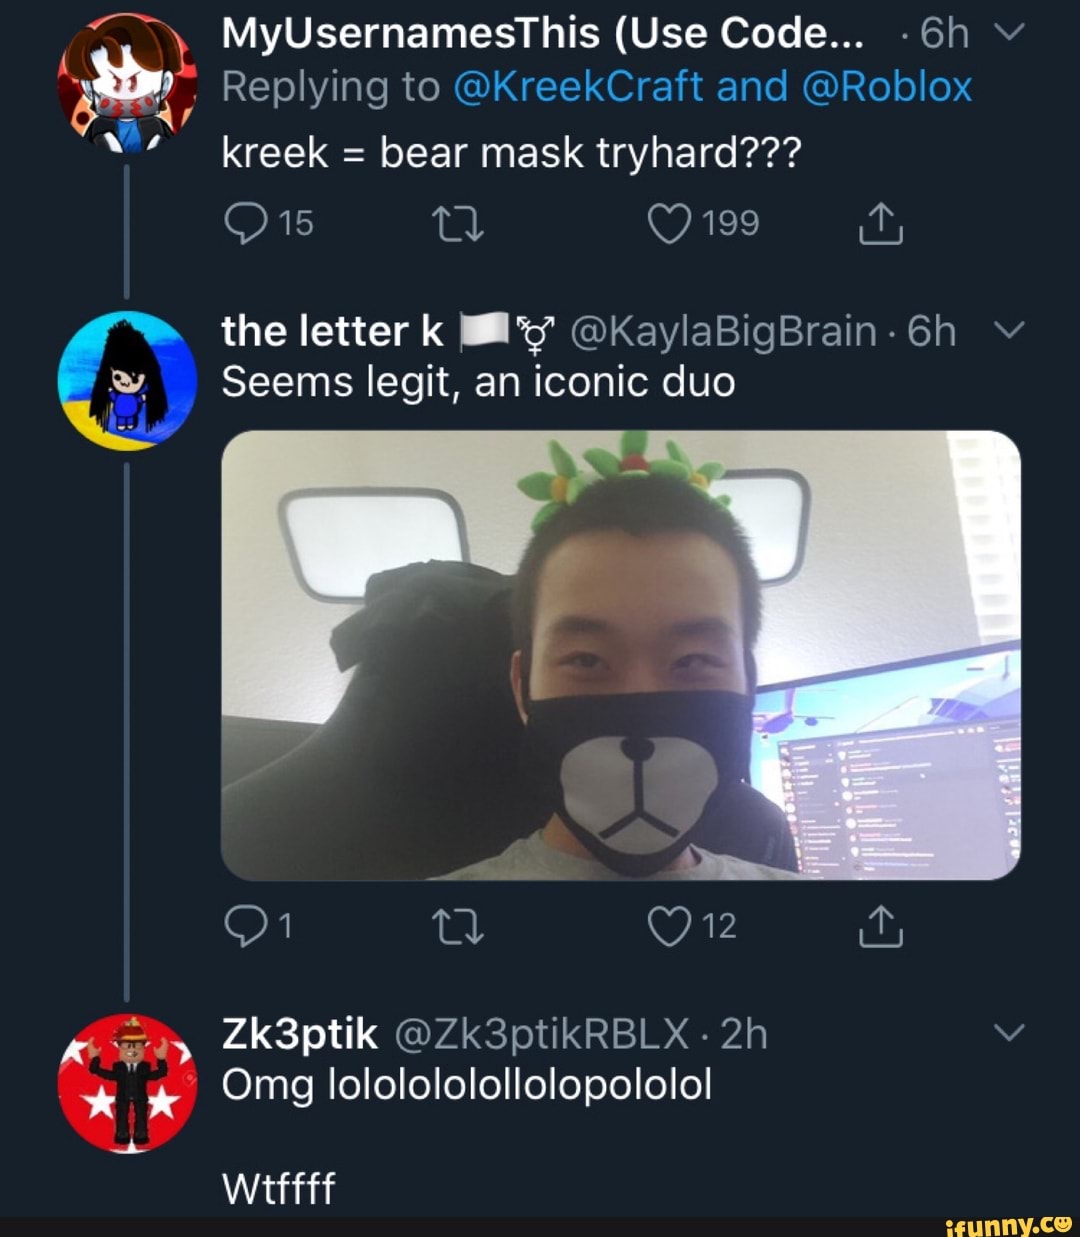 Myusernamesthis Use Code 6h Replying To Kreekcraft And Roblox Kreek Bear Mask Tryhard The Letter K By Okaylabigbrain 6h Y Seems Legit An Iconic Duo Omg Lololololollolopololo Ifunny - code for bear mask in roblox